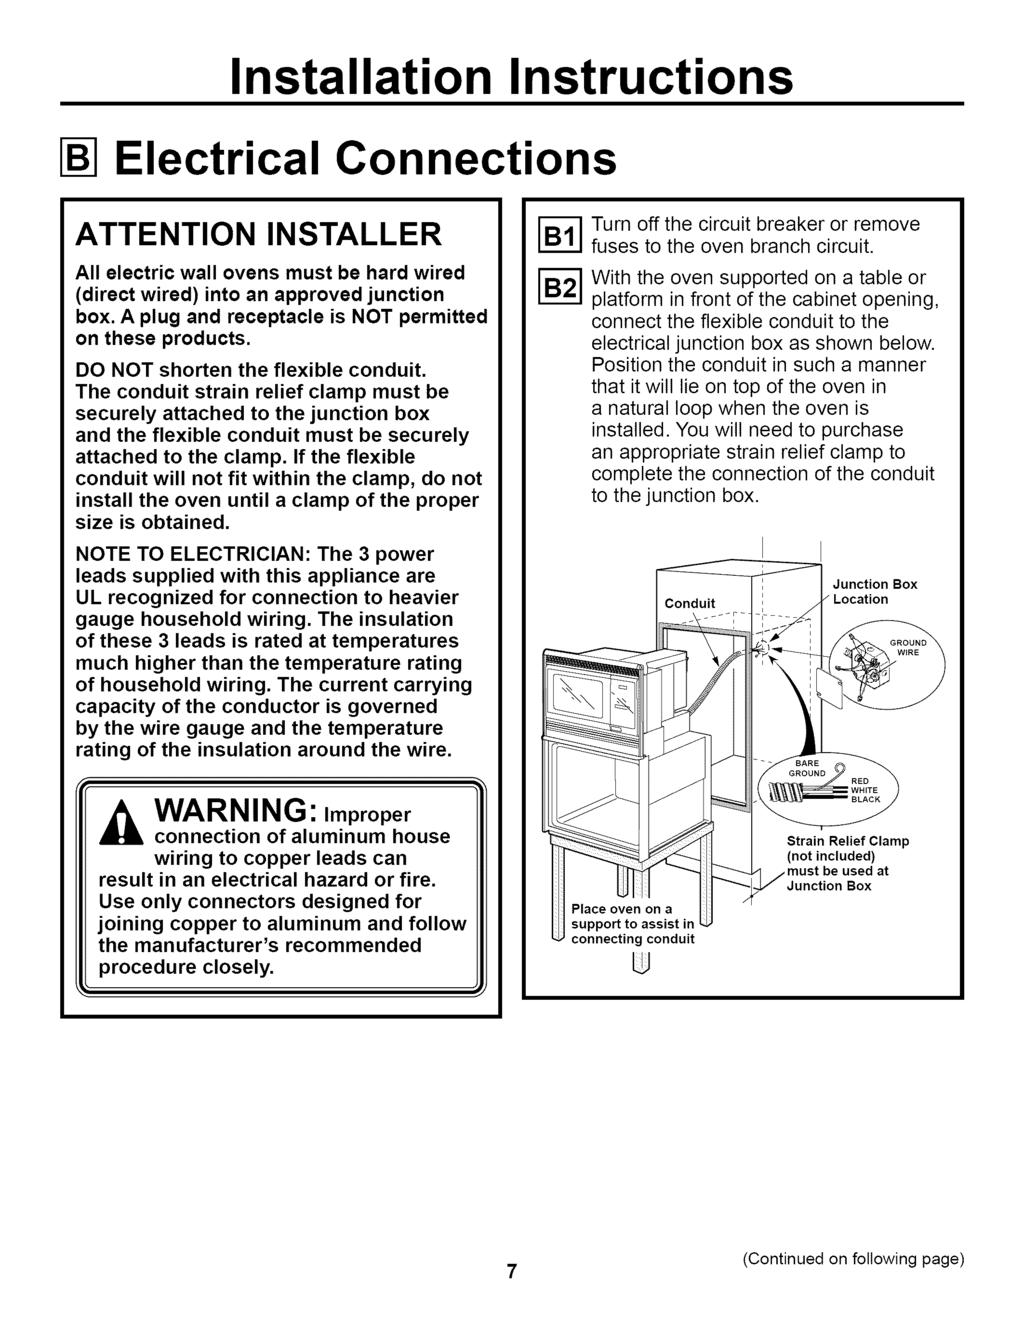 Electrical Connections ATTENTION INSTALLER All electric wall ovens must be hard wired (direct wired) into an approved junction box. A plug and receptacle is NOT permitted on these products.